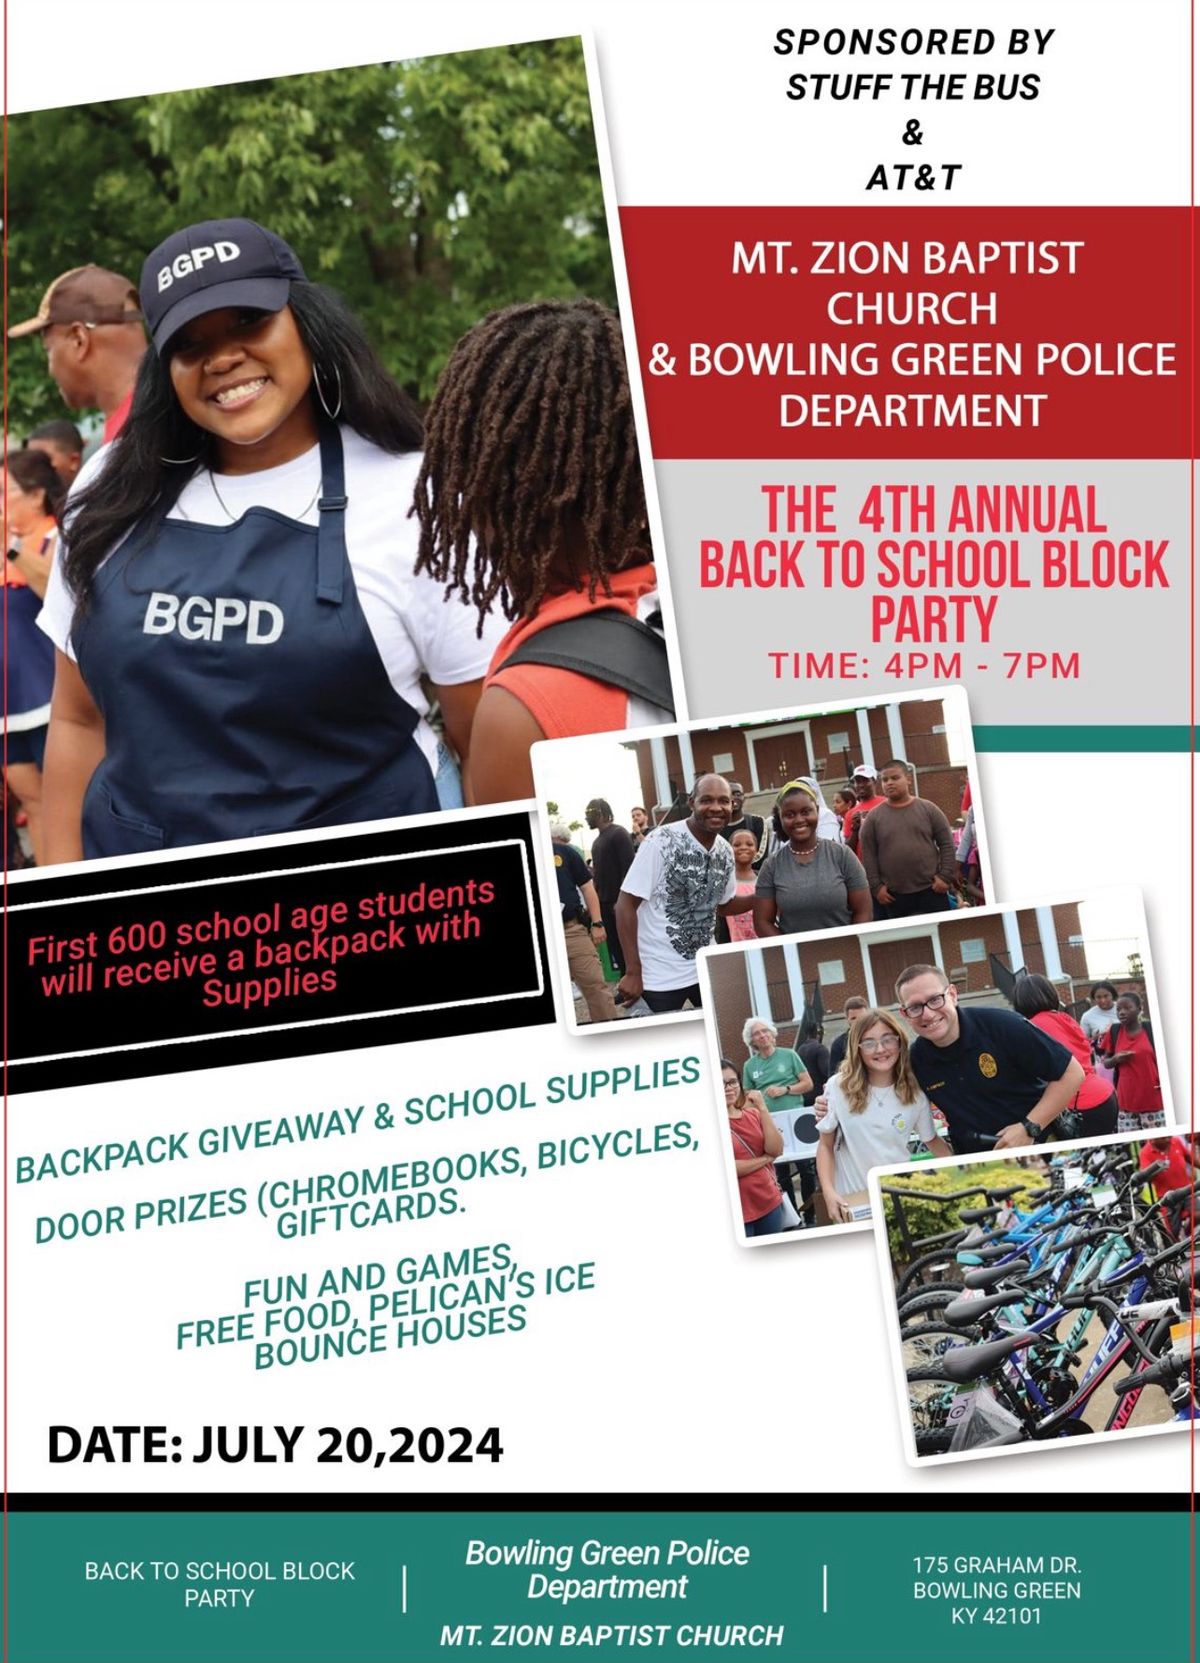 4th Annual Back to School Block Party